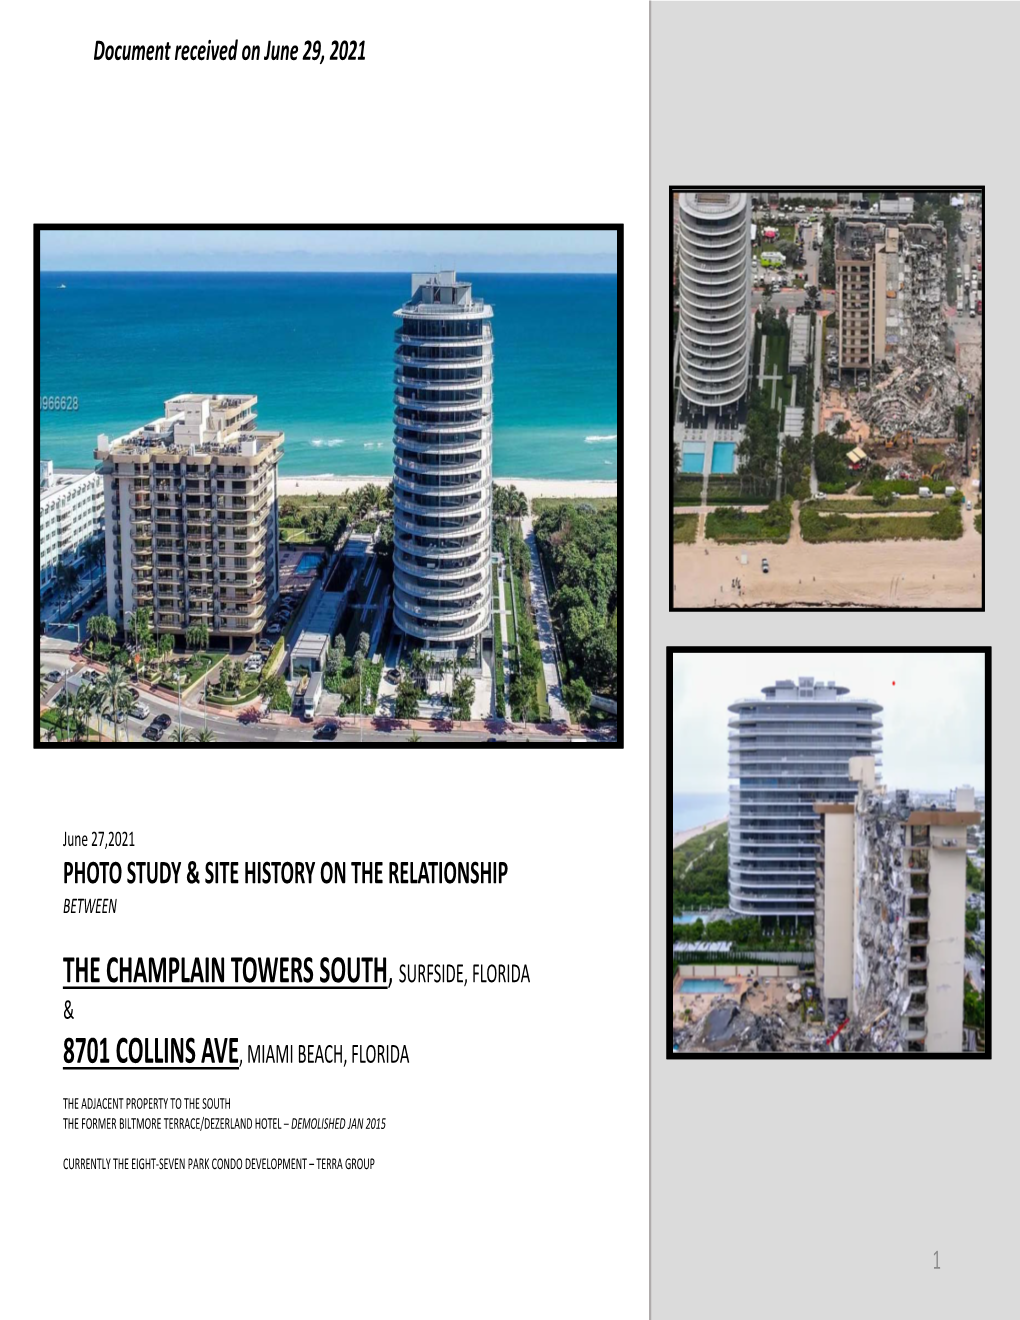 The Champlain Towers South, Surfside, Florida & 8701 Collins Ave, Miami Beach, Florida